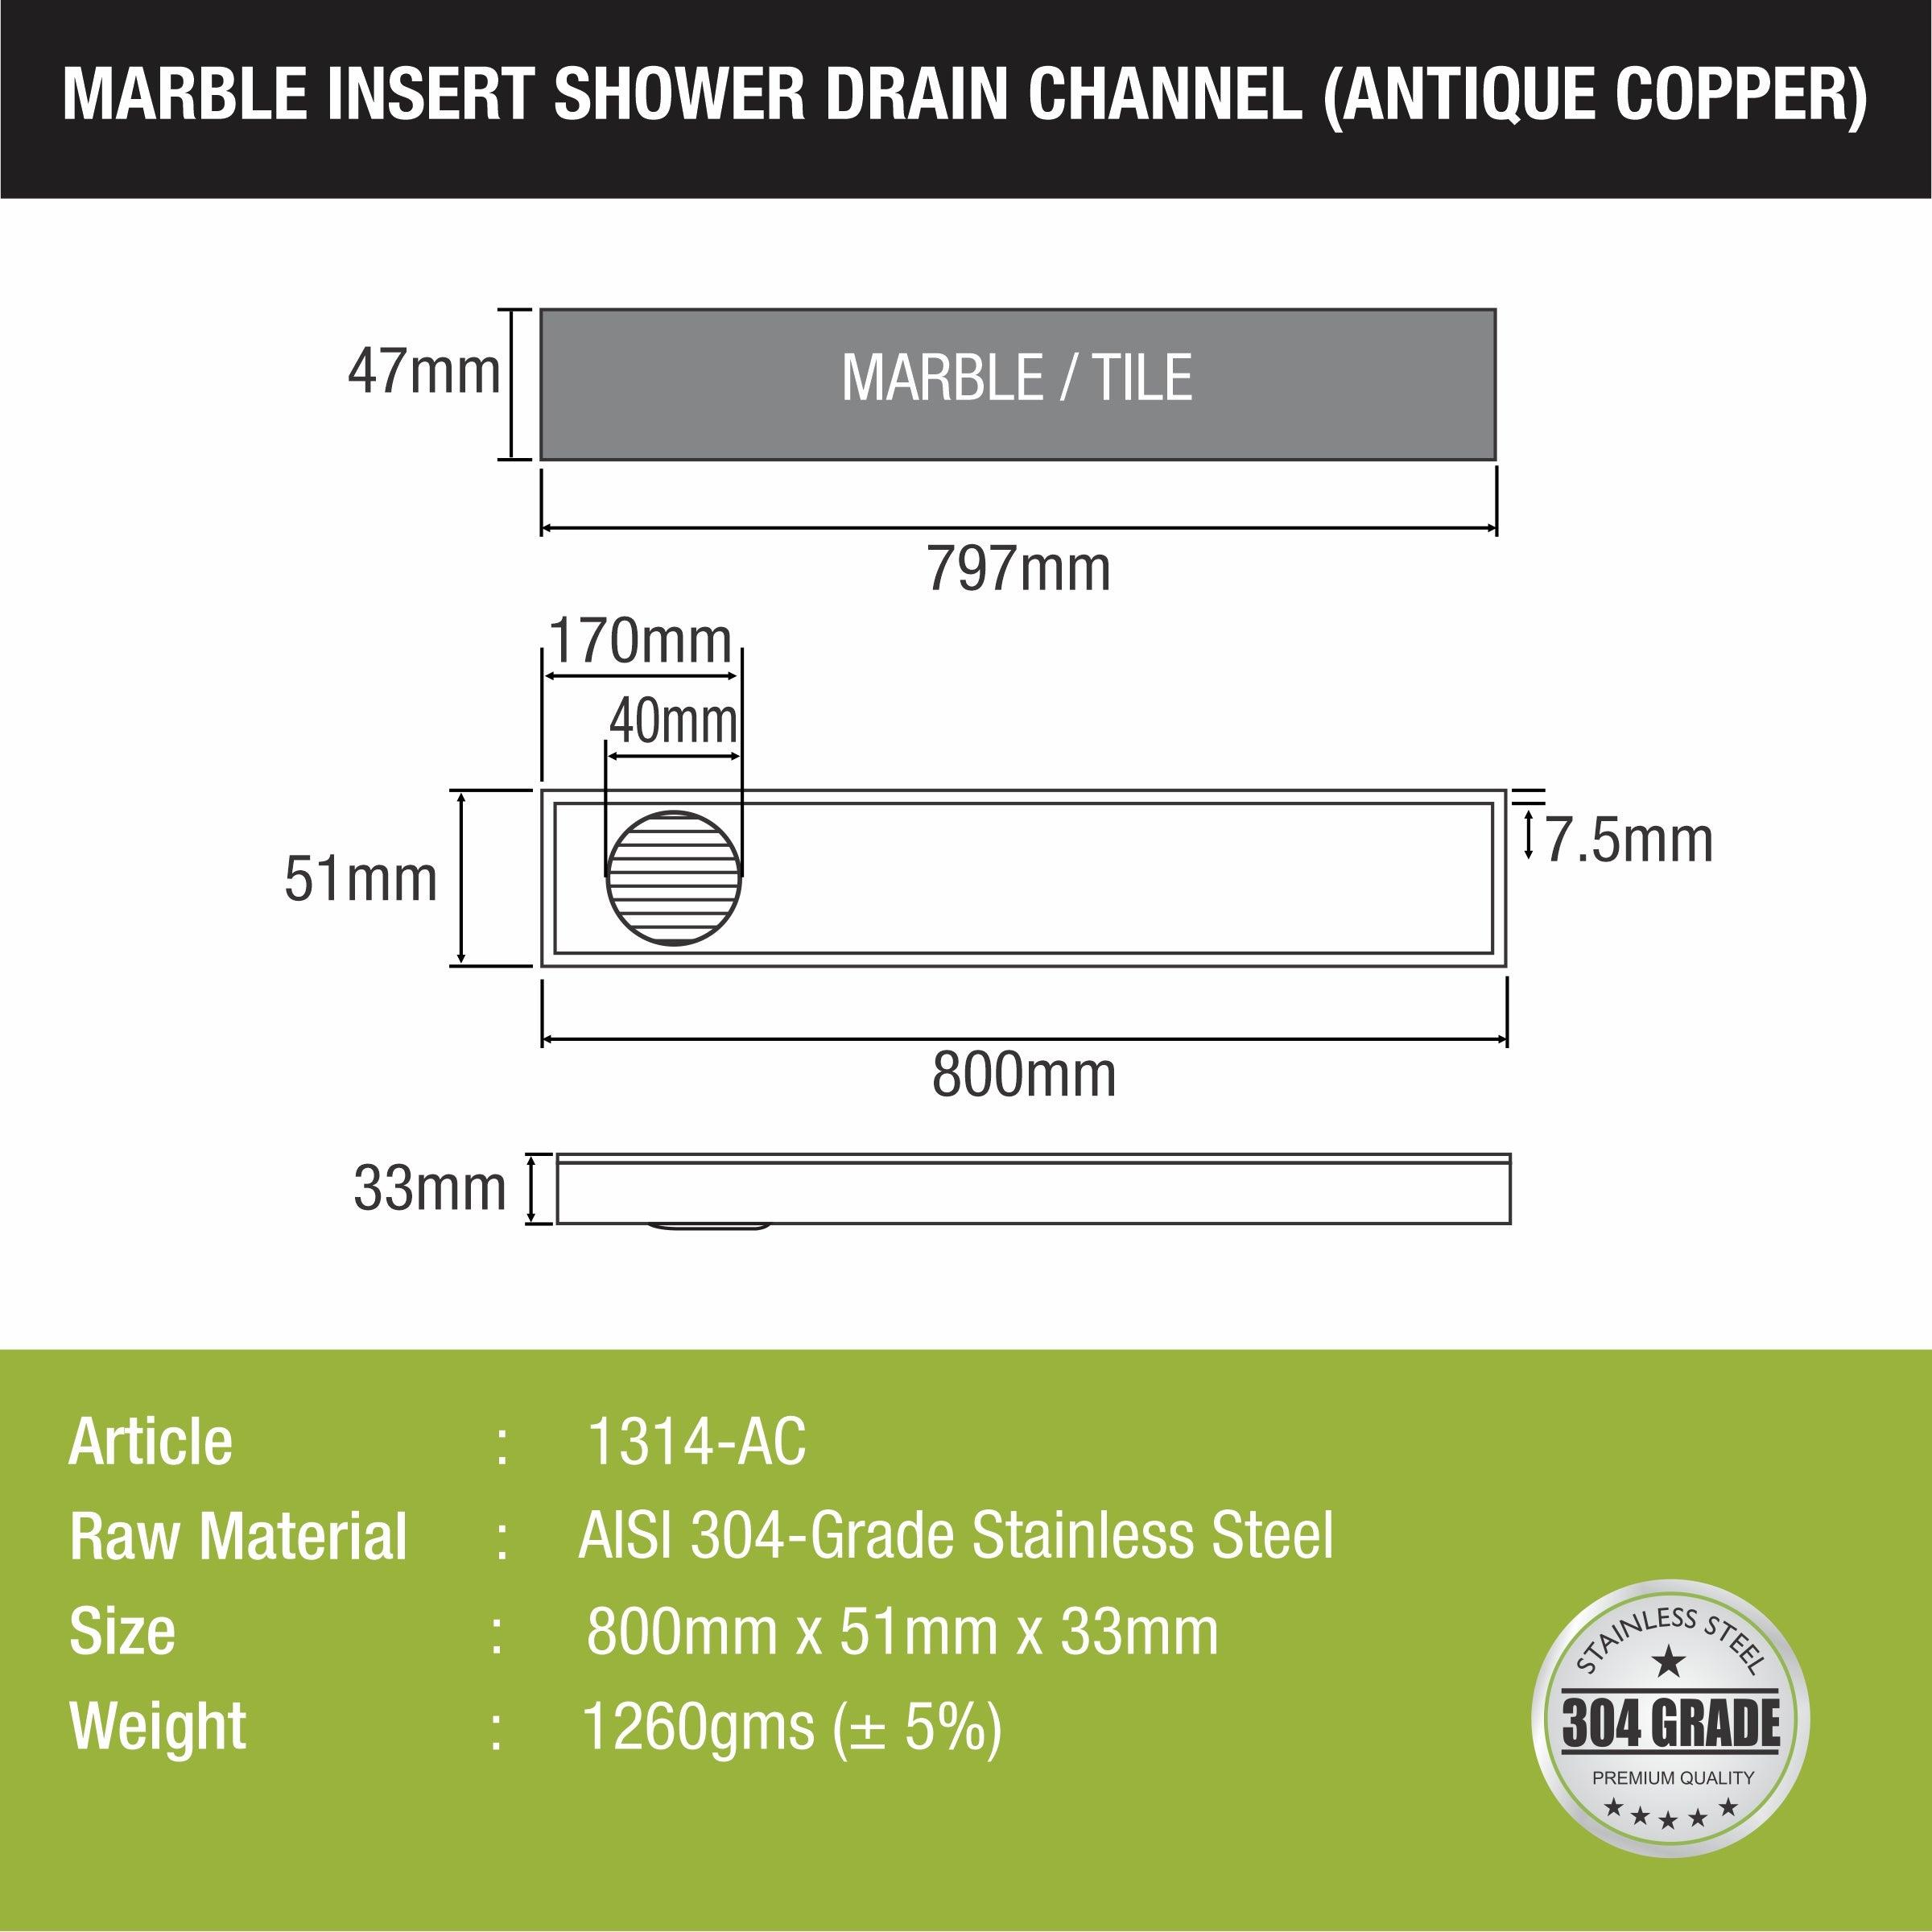 Marble Insert Shower Drain Channel - Antique Copper (32 x 2 Inches) sizes and dimensions